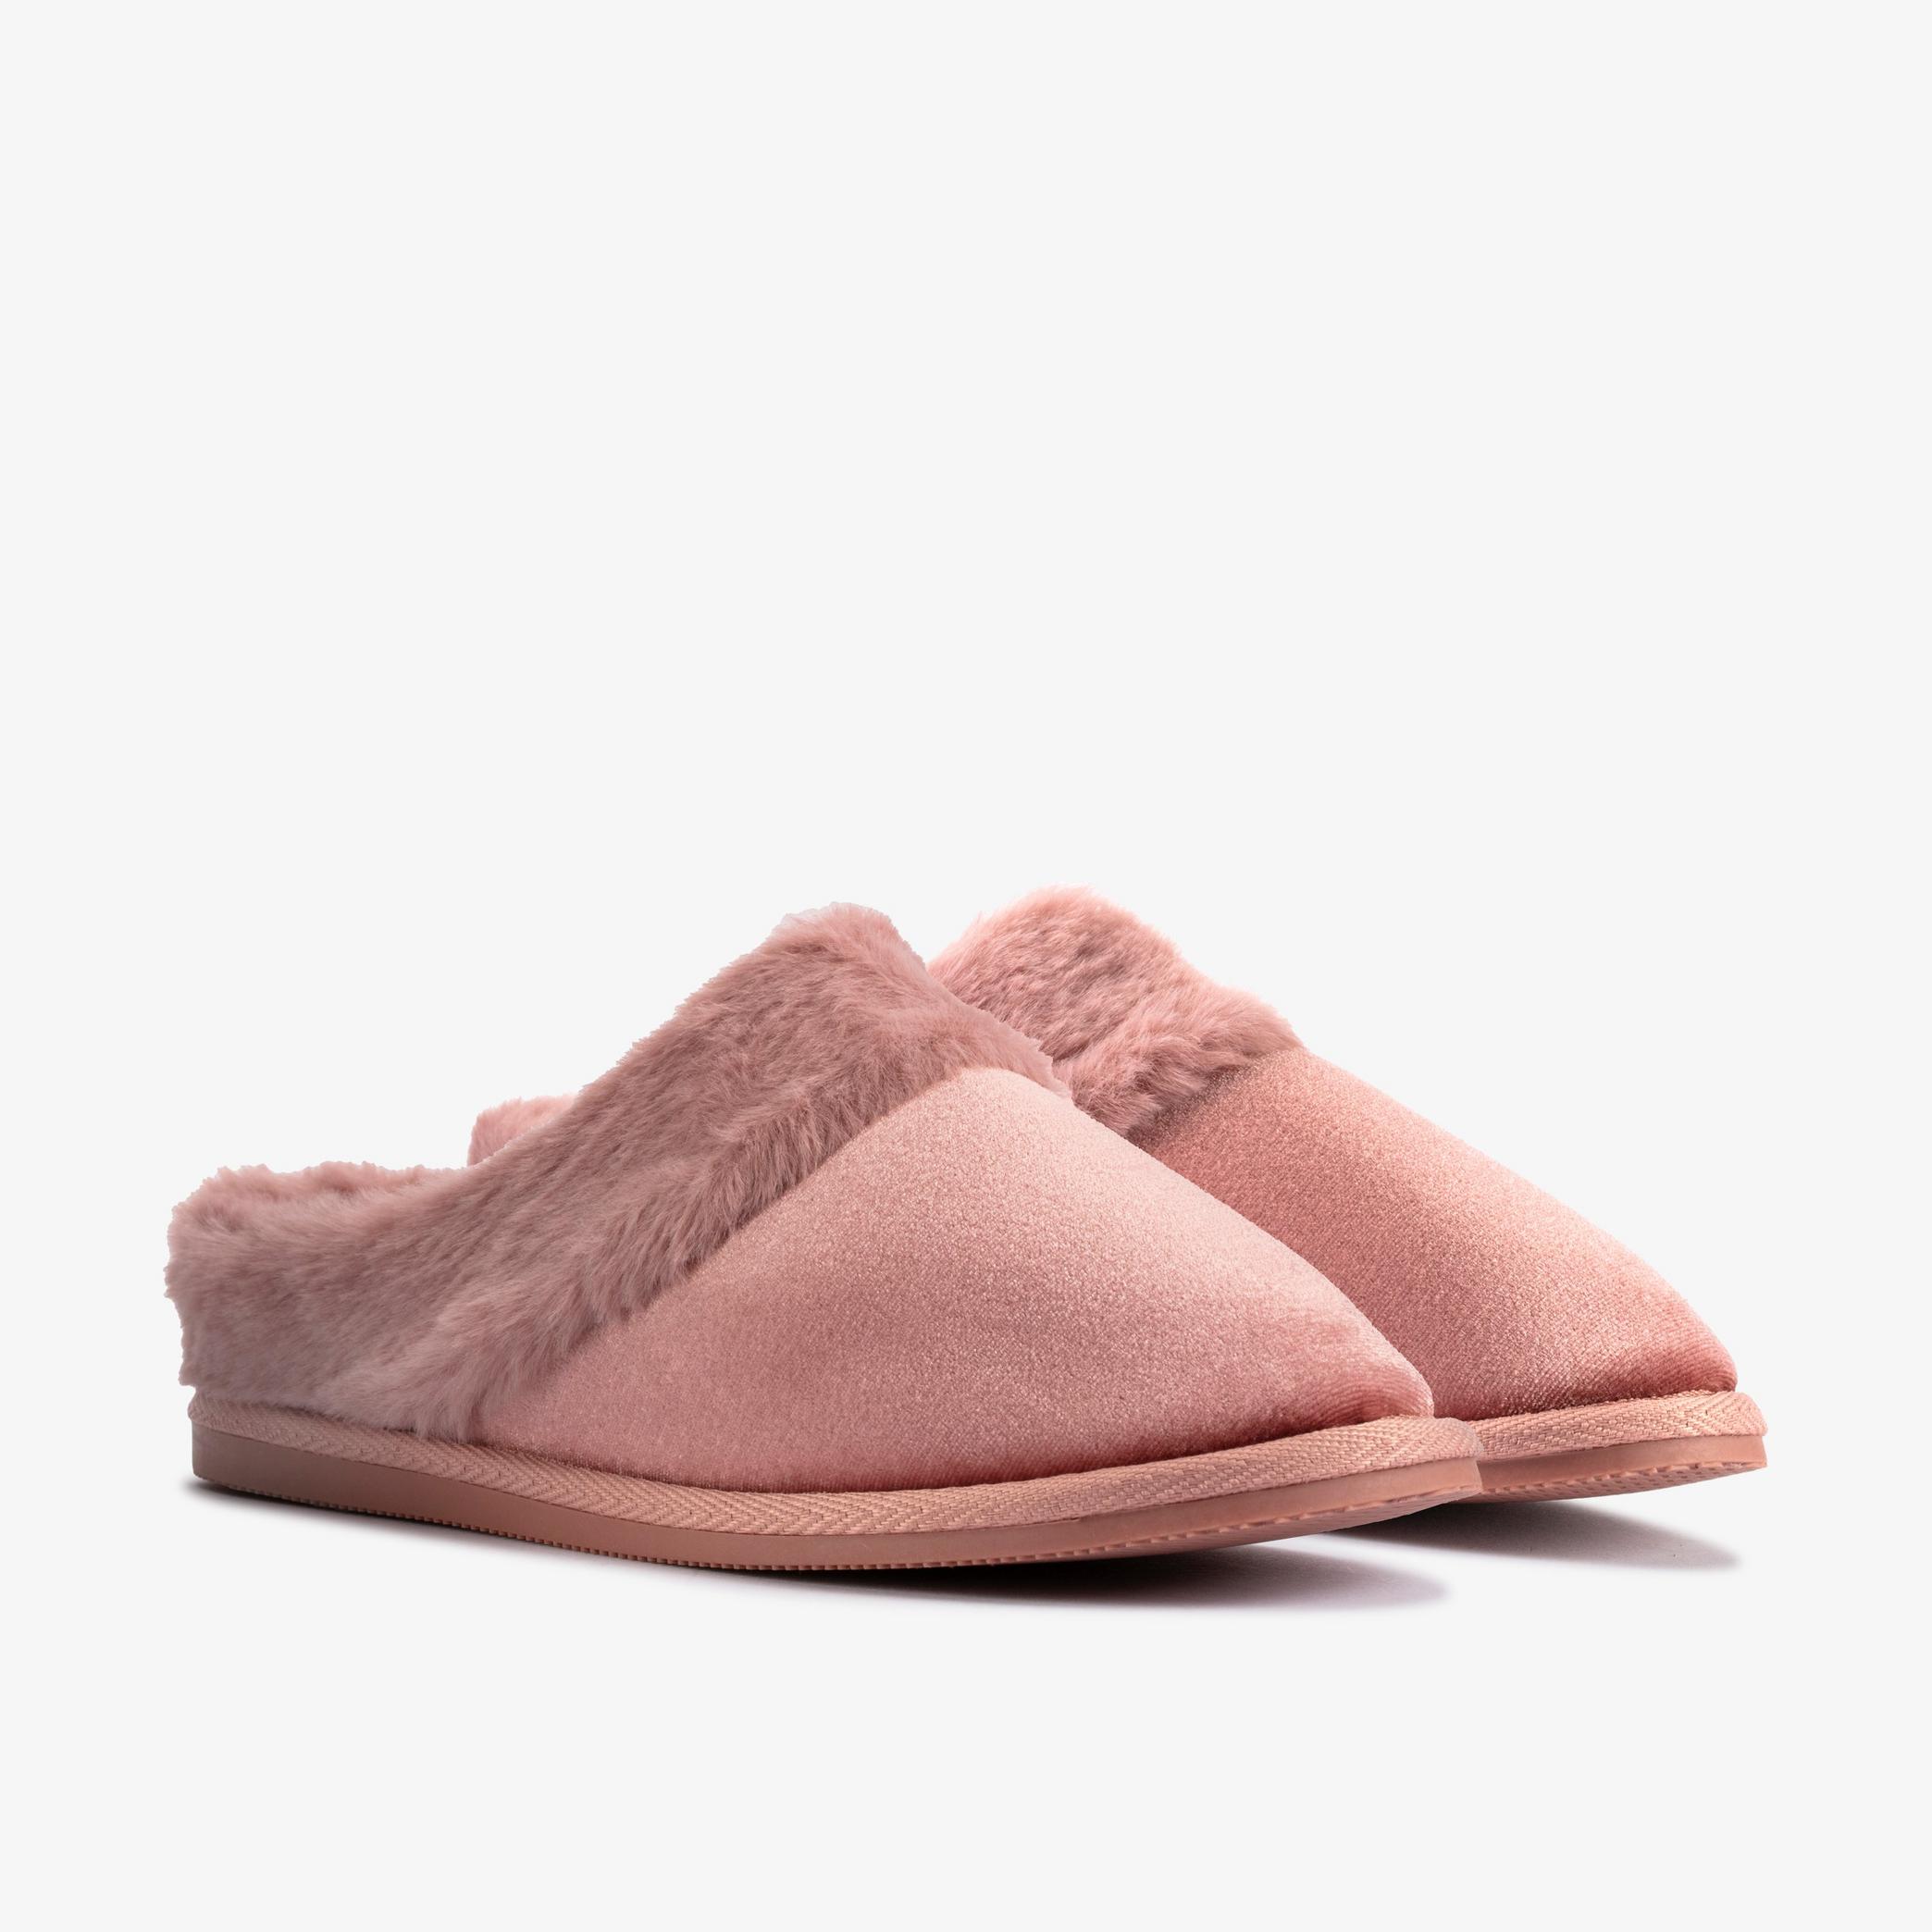 Bundle Soft Rose Slippers, view 4 of 6